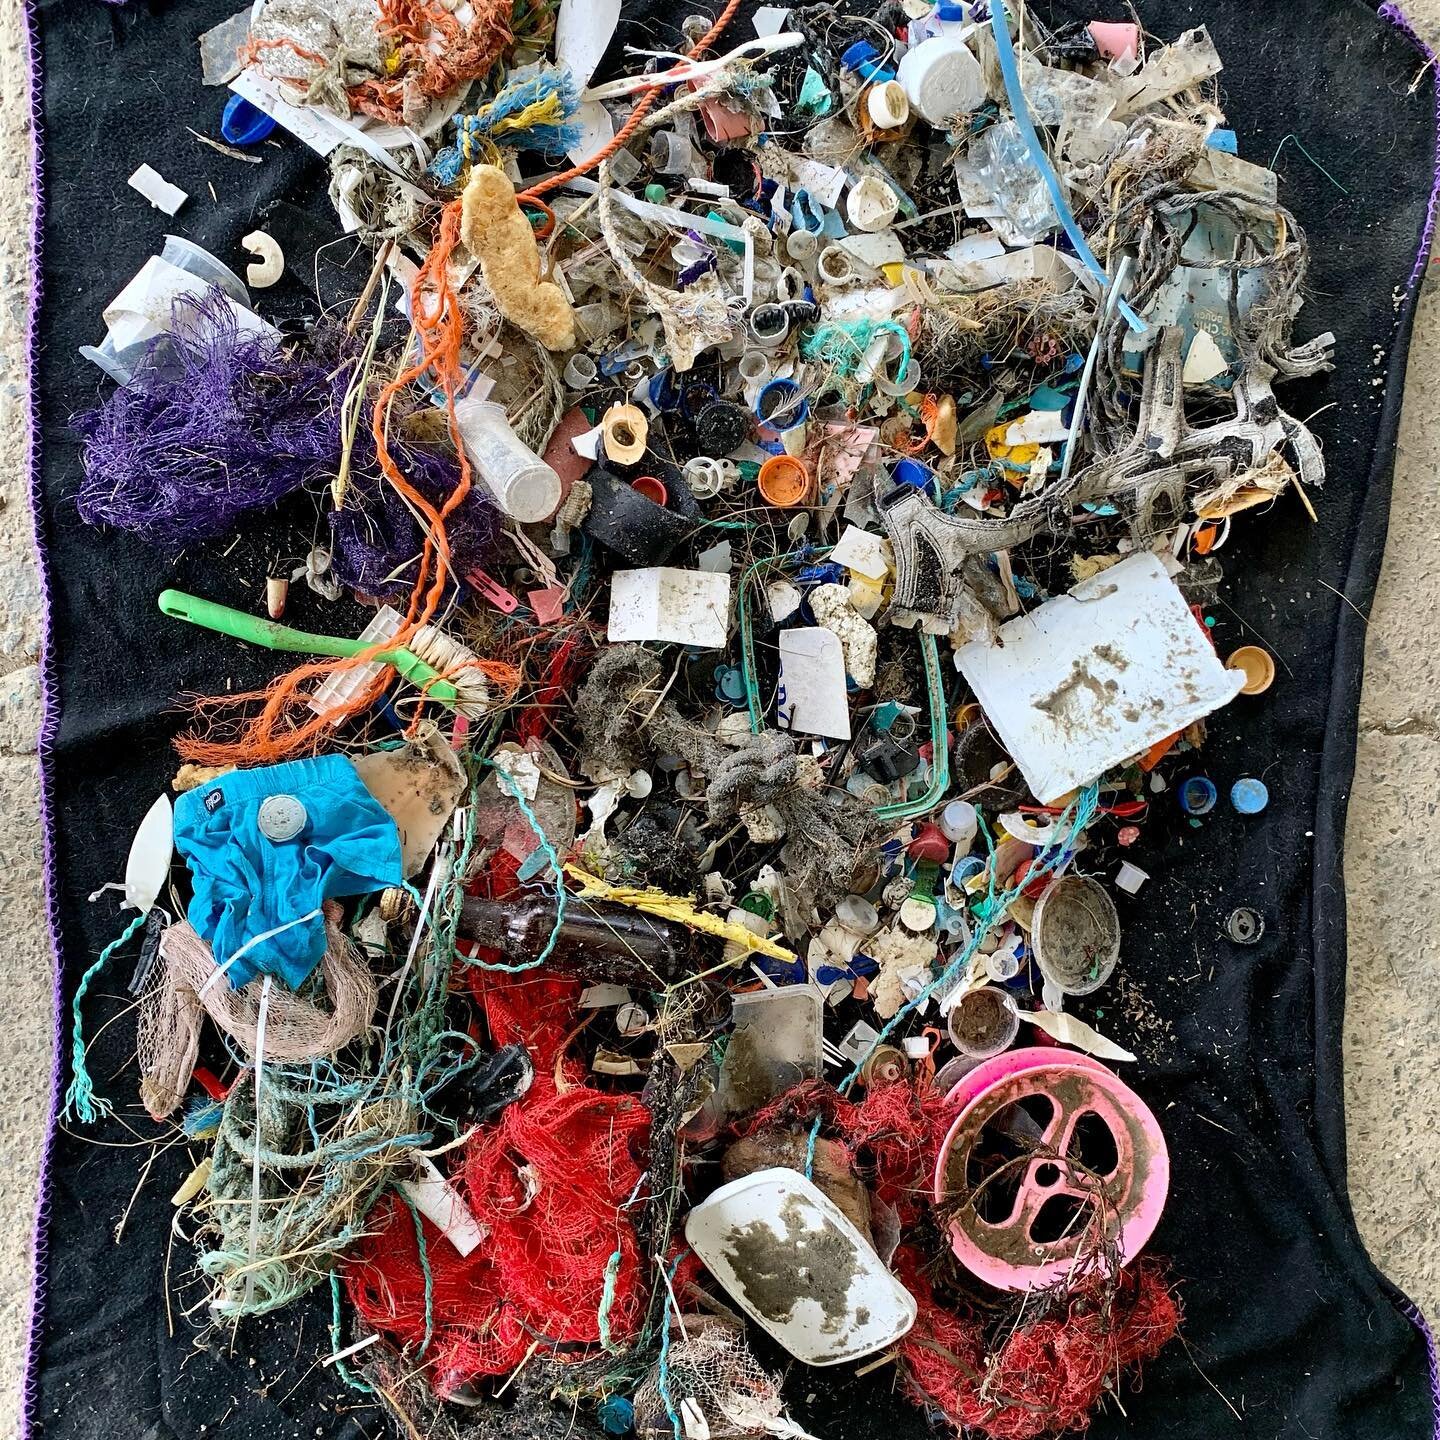 The beach looked clean and fresh this morning but wasn&rsquo;t!!
#beachwalk #beachrubbish #plasticpollution #plasticrope #plasticwaste #pollution #microplastic #rubbish